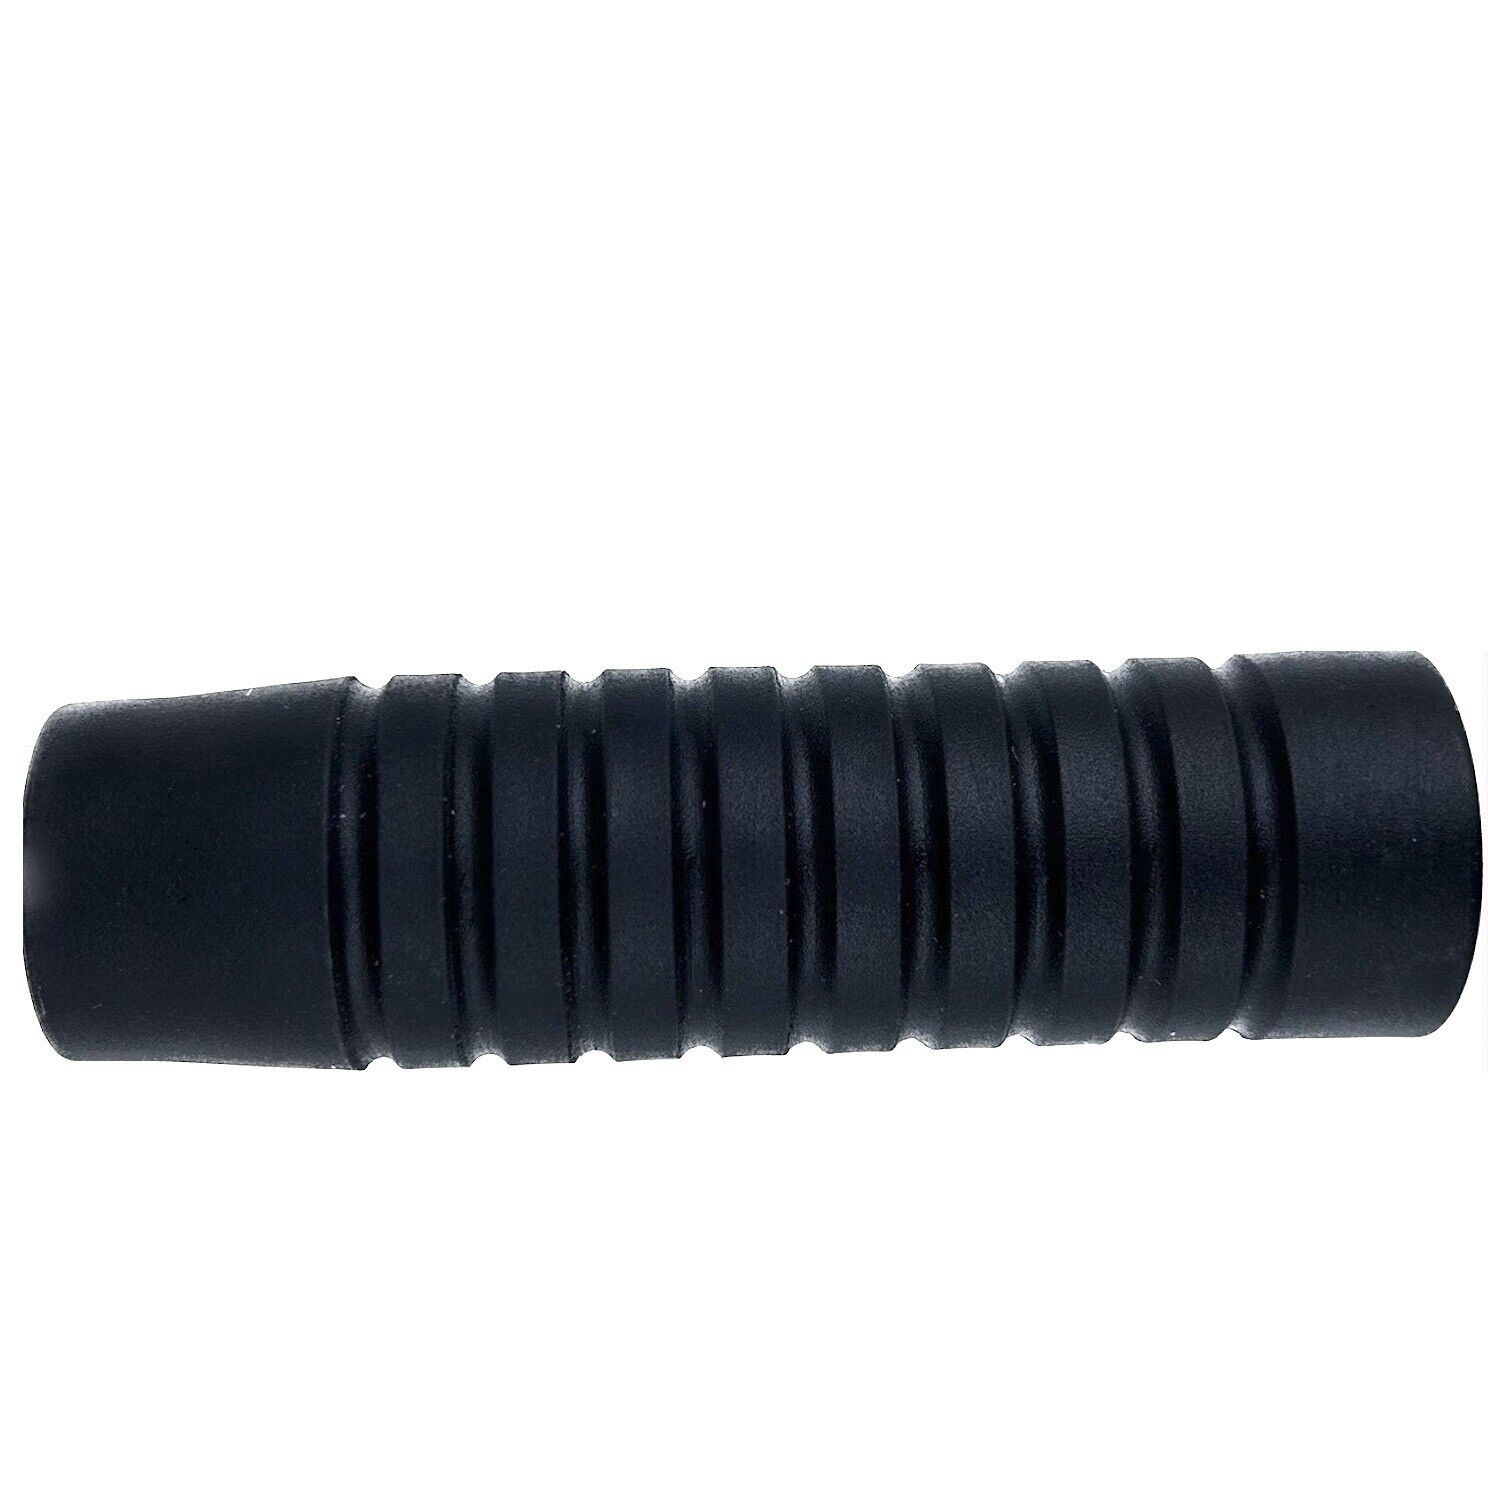 Forend For Winchester 1200 1300 Polymer Black